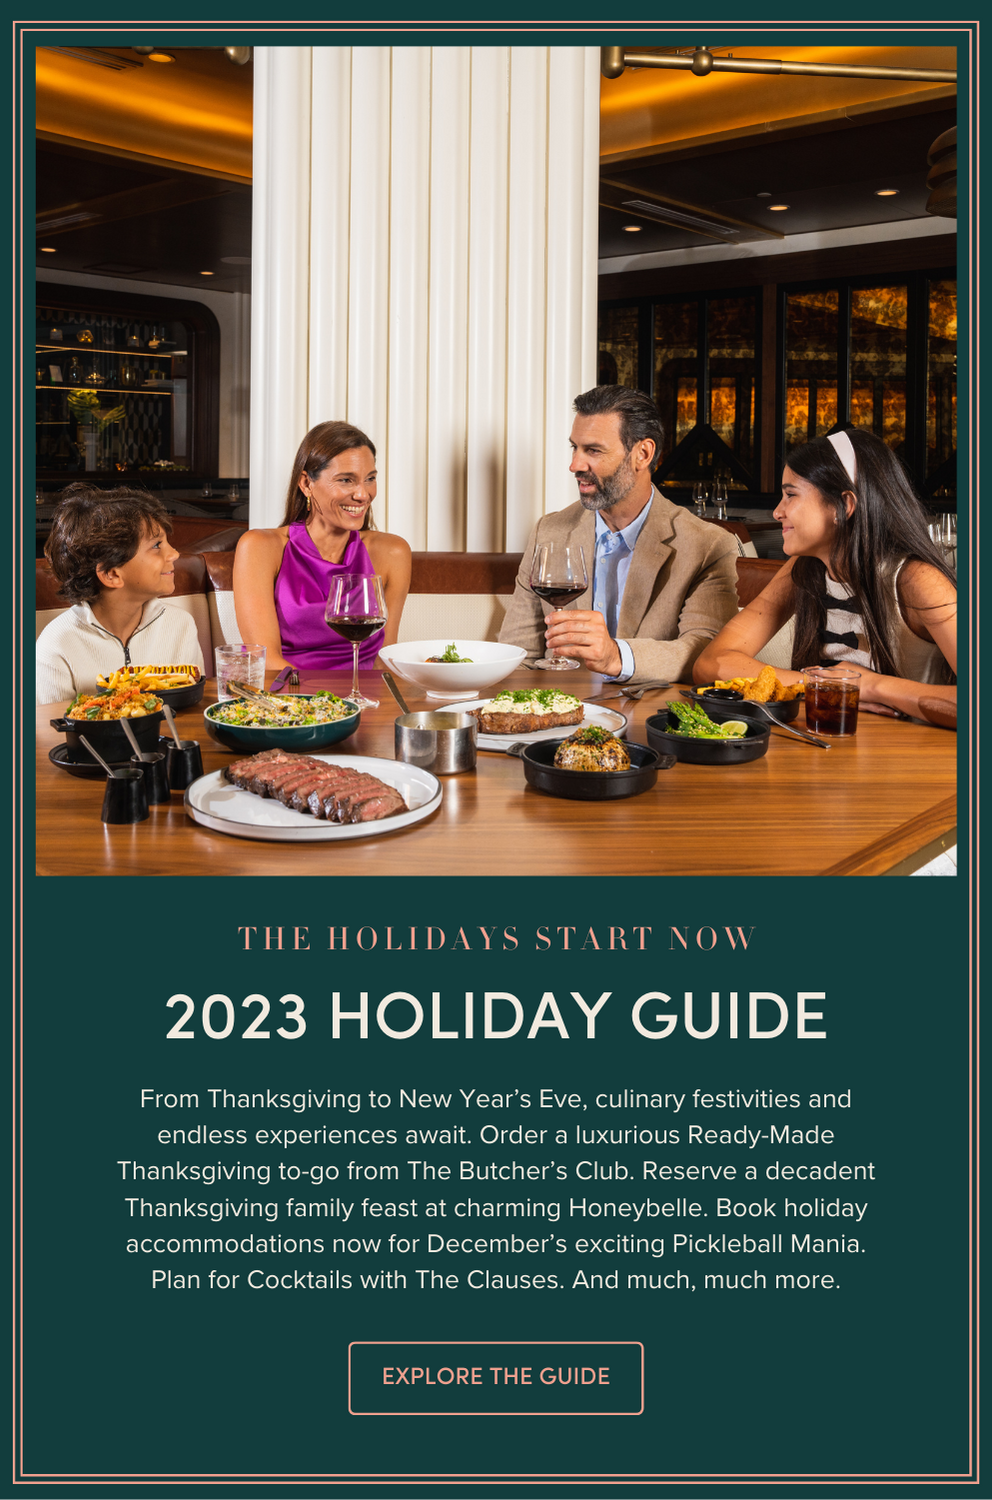 2023 Holiday Guide: From Thanksgiving to New Year’s Eve, culinary festivities and endless experiences await. Order a luxurious Ready-Made Thanksgiving to-go from The Butcher’s Club. Reserve a decadent Thanksgiving family feast at charming Honeybelle. Book holiday accommodations now for December’s exciting Pickleball Mania. Plan for Cocktails with The Clauses. And much, much more.